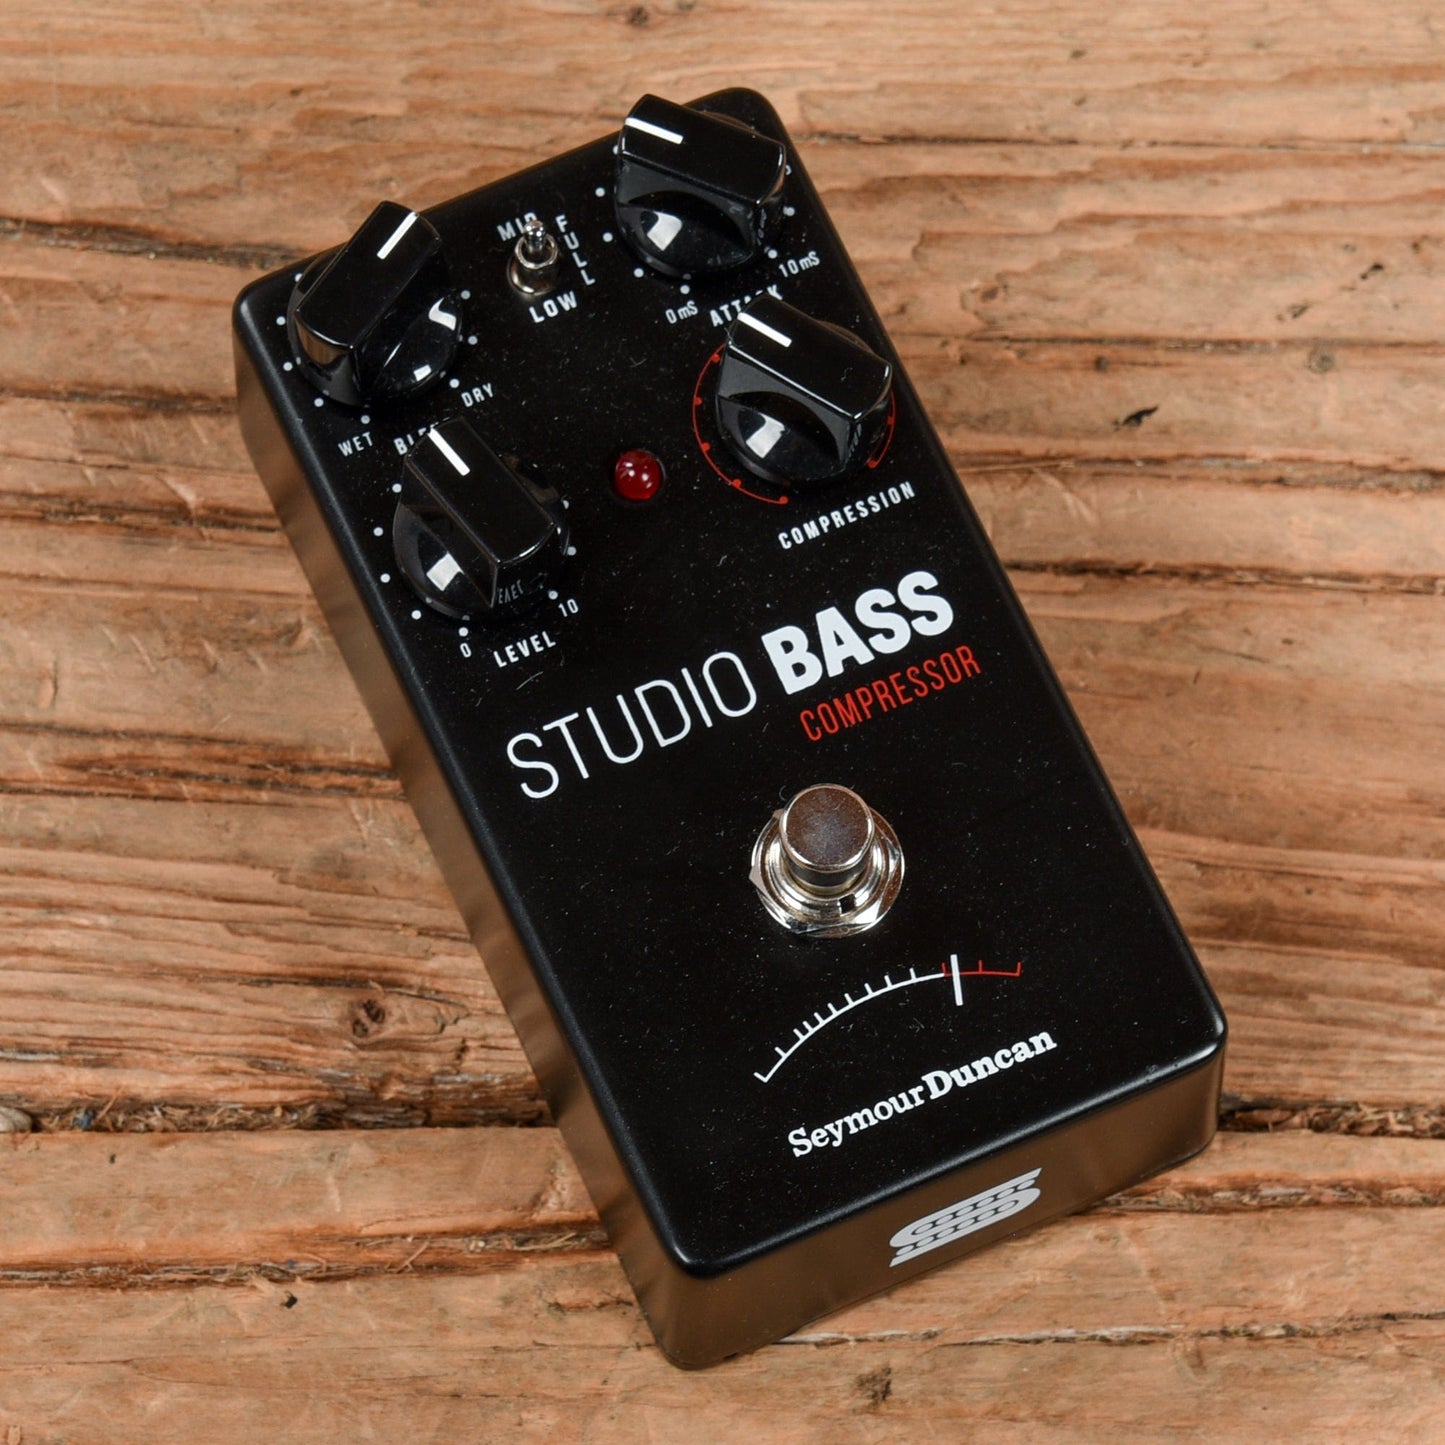 Seymour Duncan Studio Bass Compressor Effects and Pedals / Chorus and Vibrato